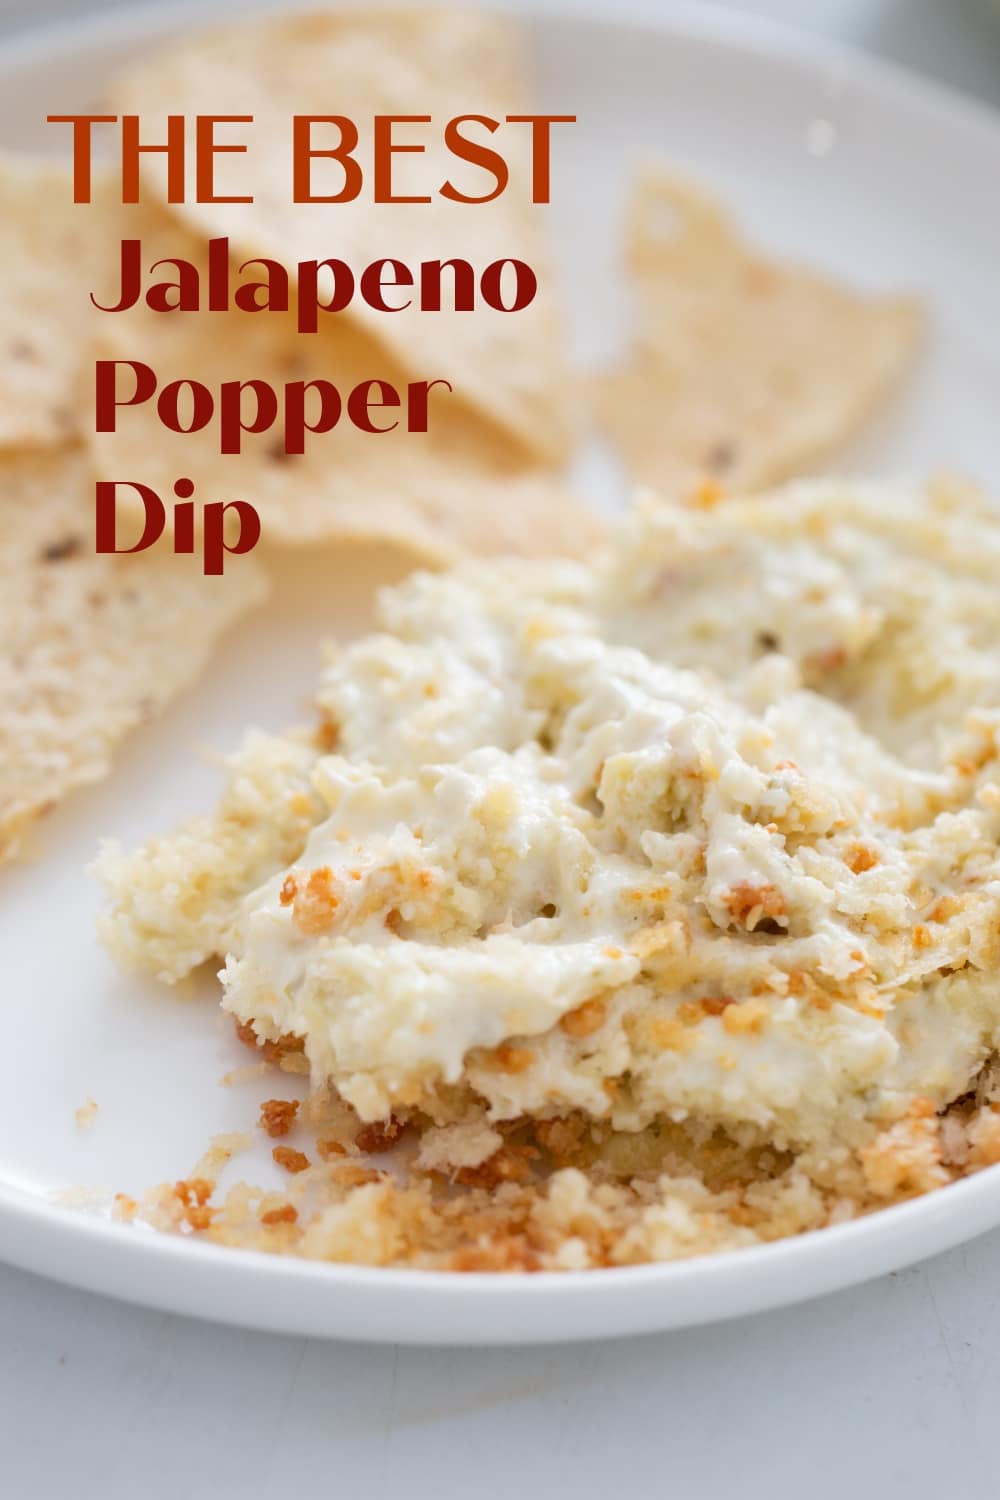 This Jalapeno Popper Dip is indulgently rich and creamy, with just the right amount of heat and crunch. A game day must, but is a hit for any gathering throughout the year. via @cmpollak1